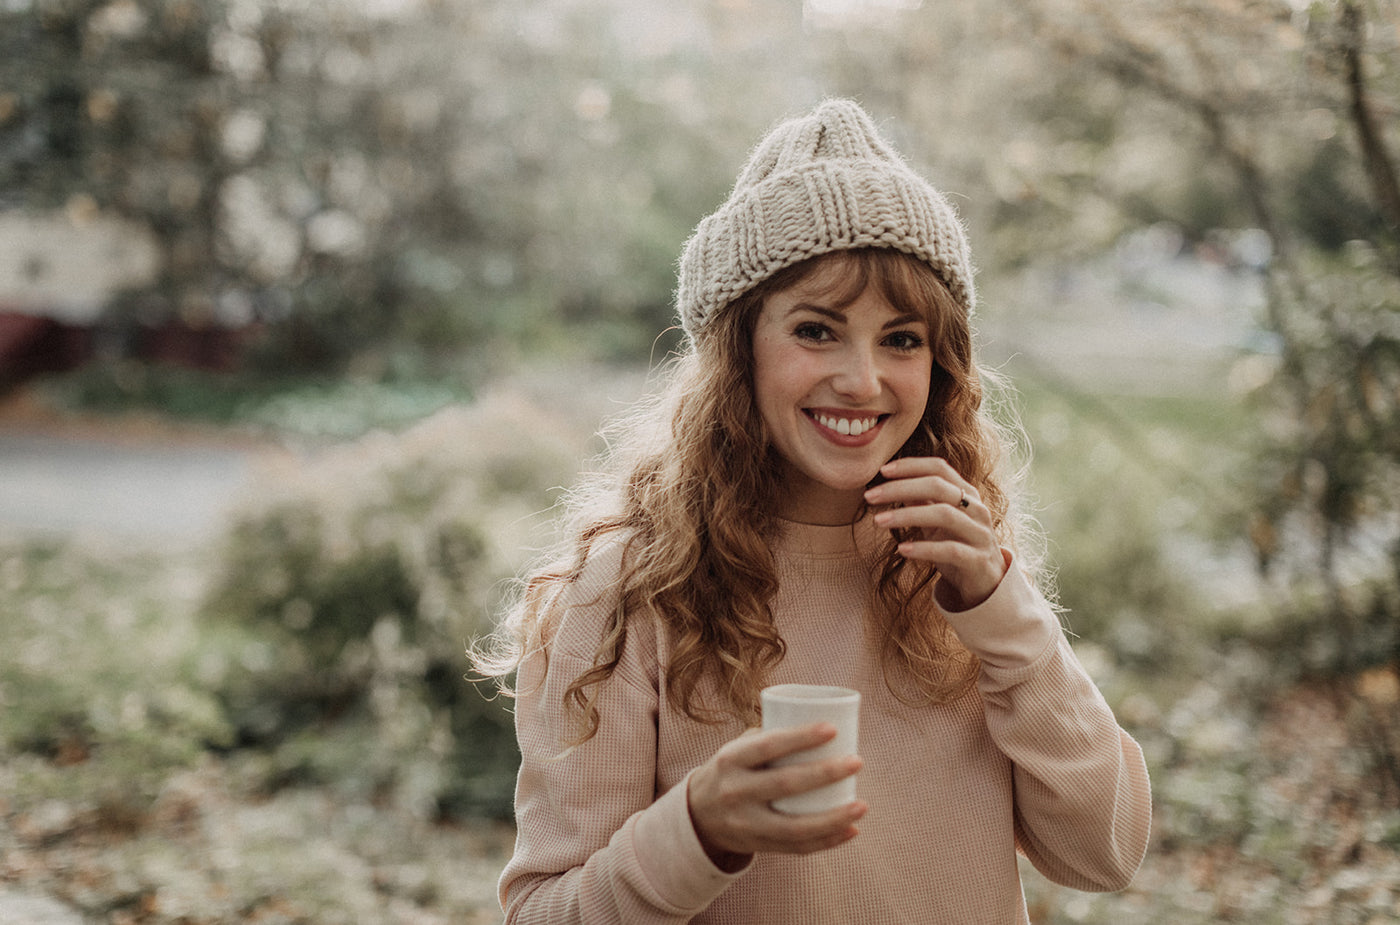 Beautiful white woman with long auburn hair standing outside in pink shirt and winter hat smiling and holding a mug of hot beverage